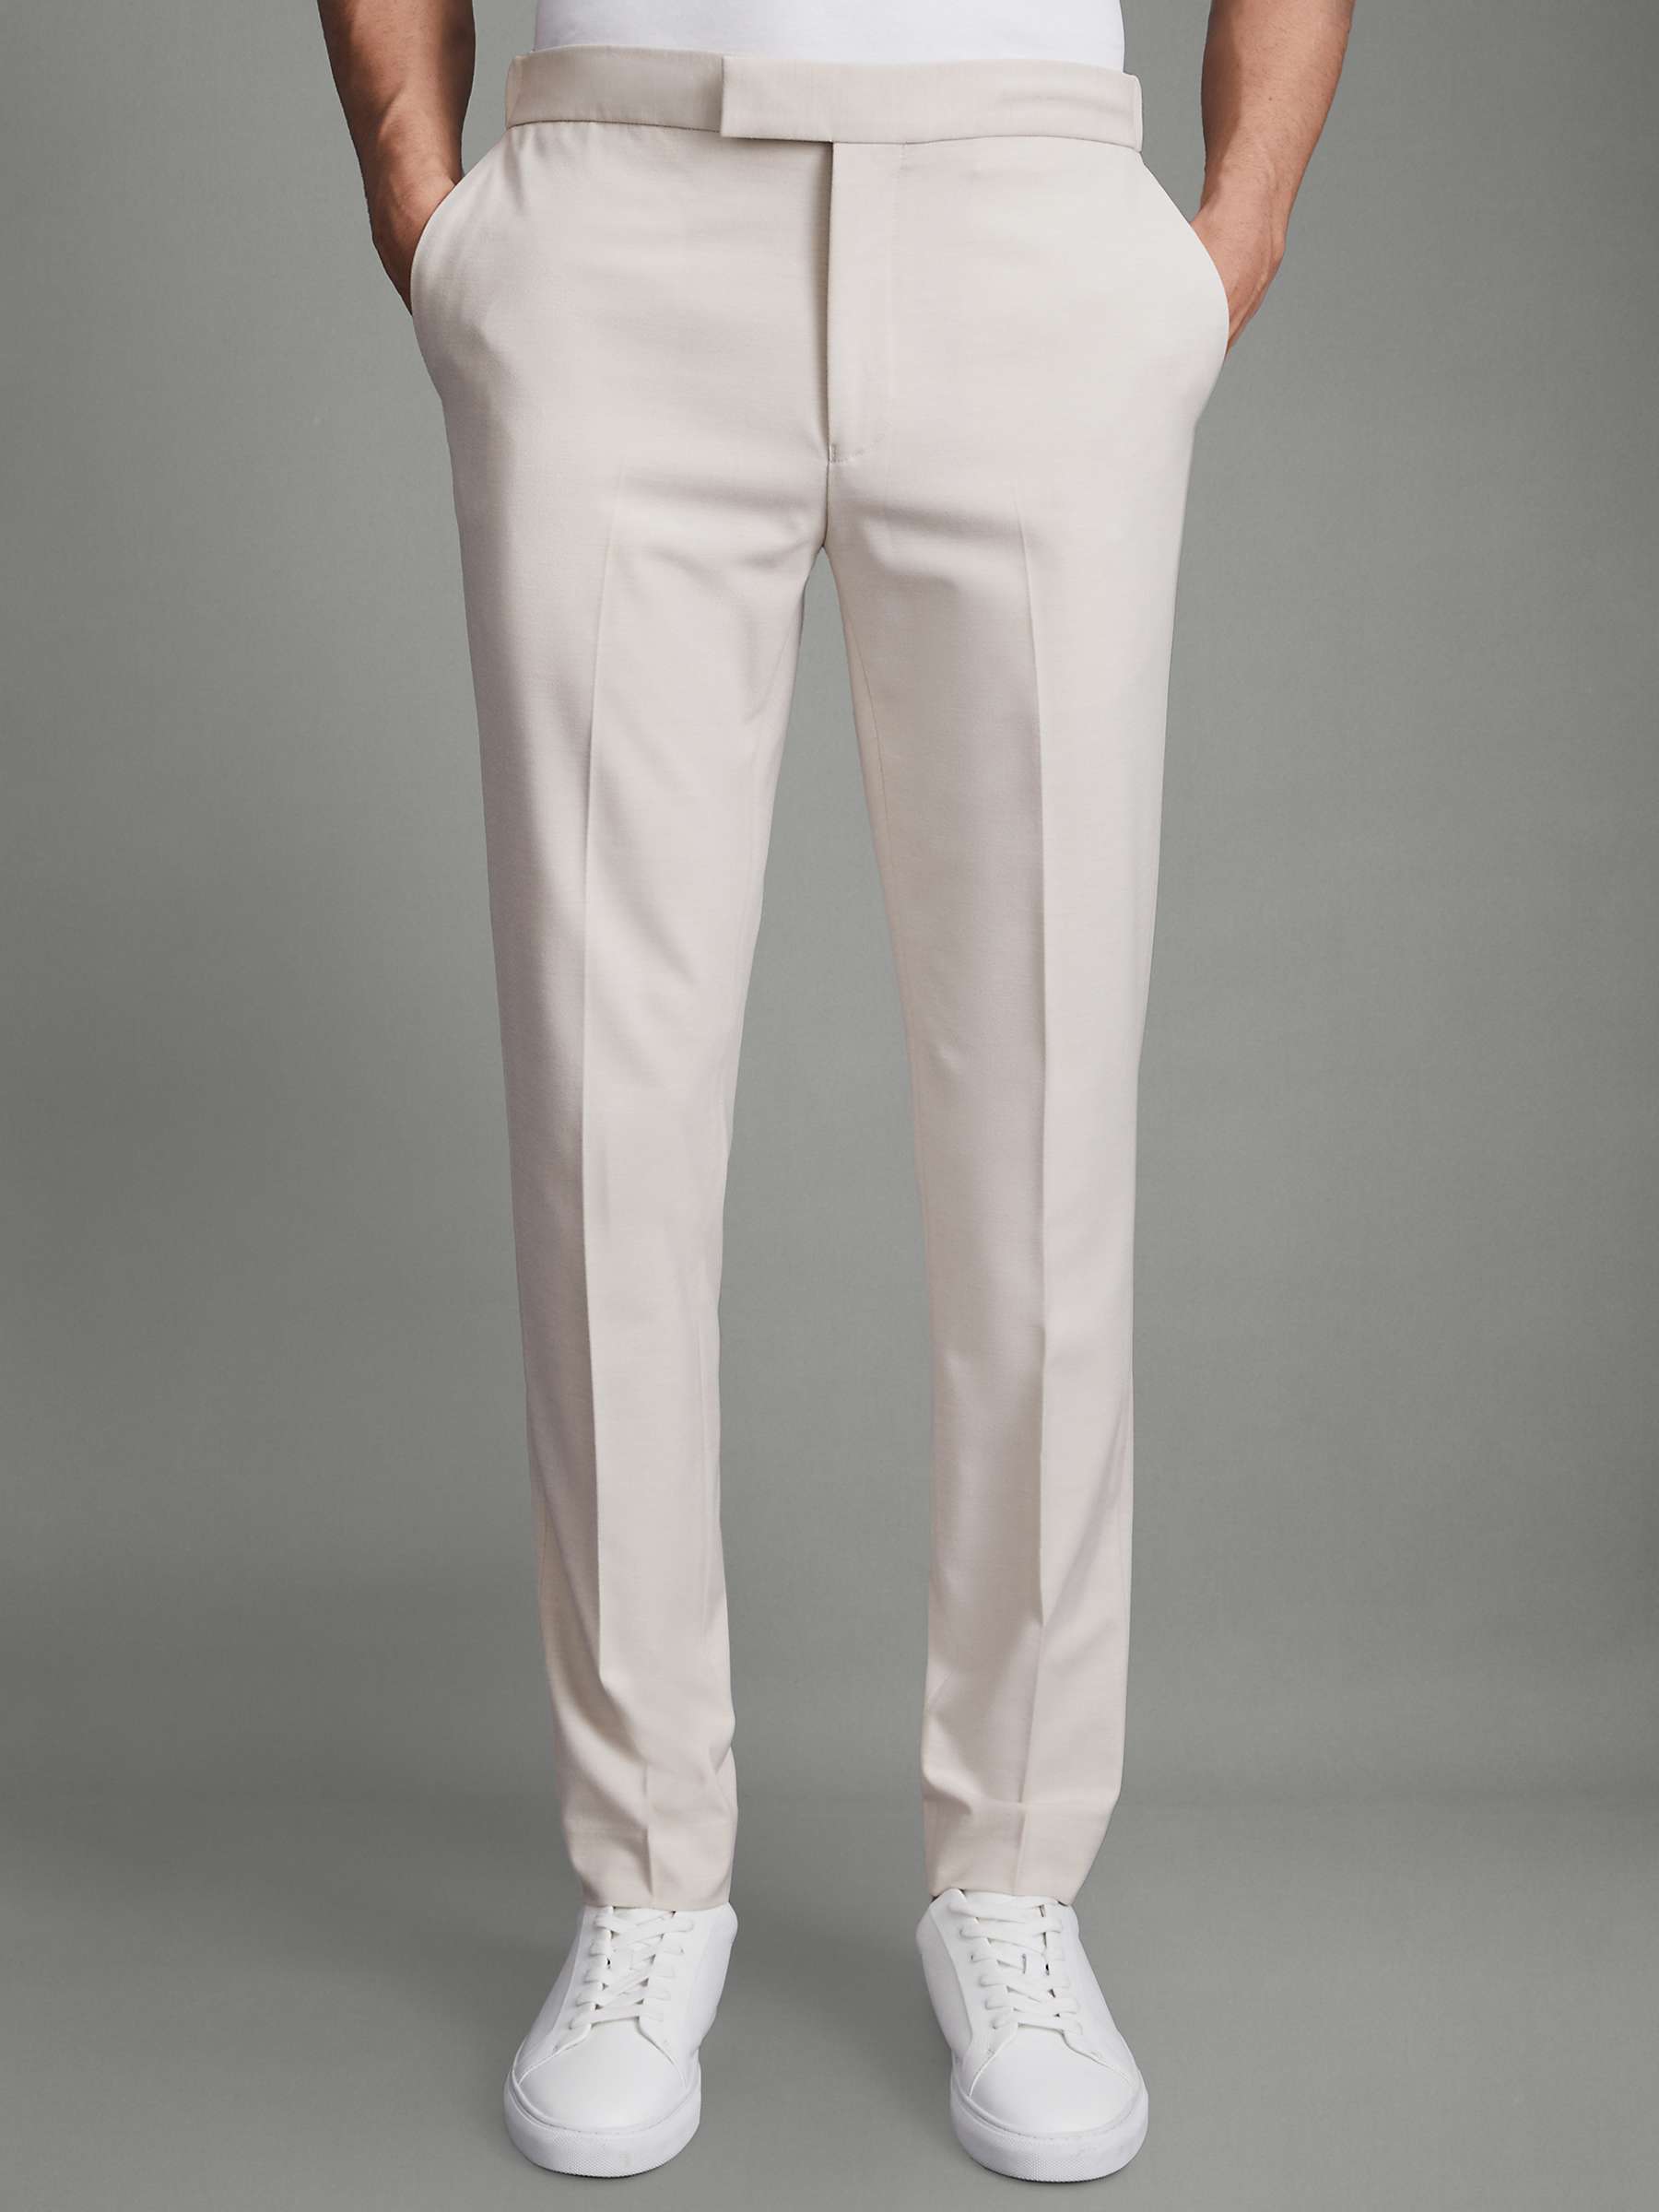 Buy Reiss Found Draw Cord Waist Slim Fit Trousers, Stone Online at johnlewis.com